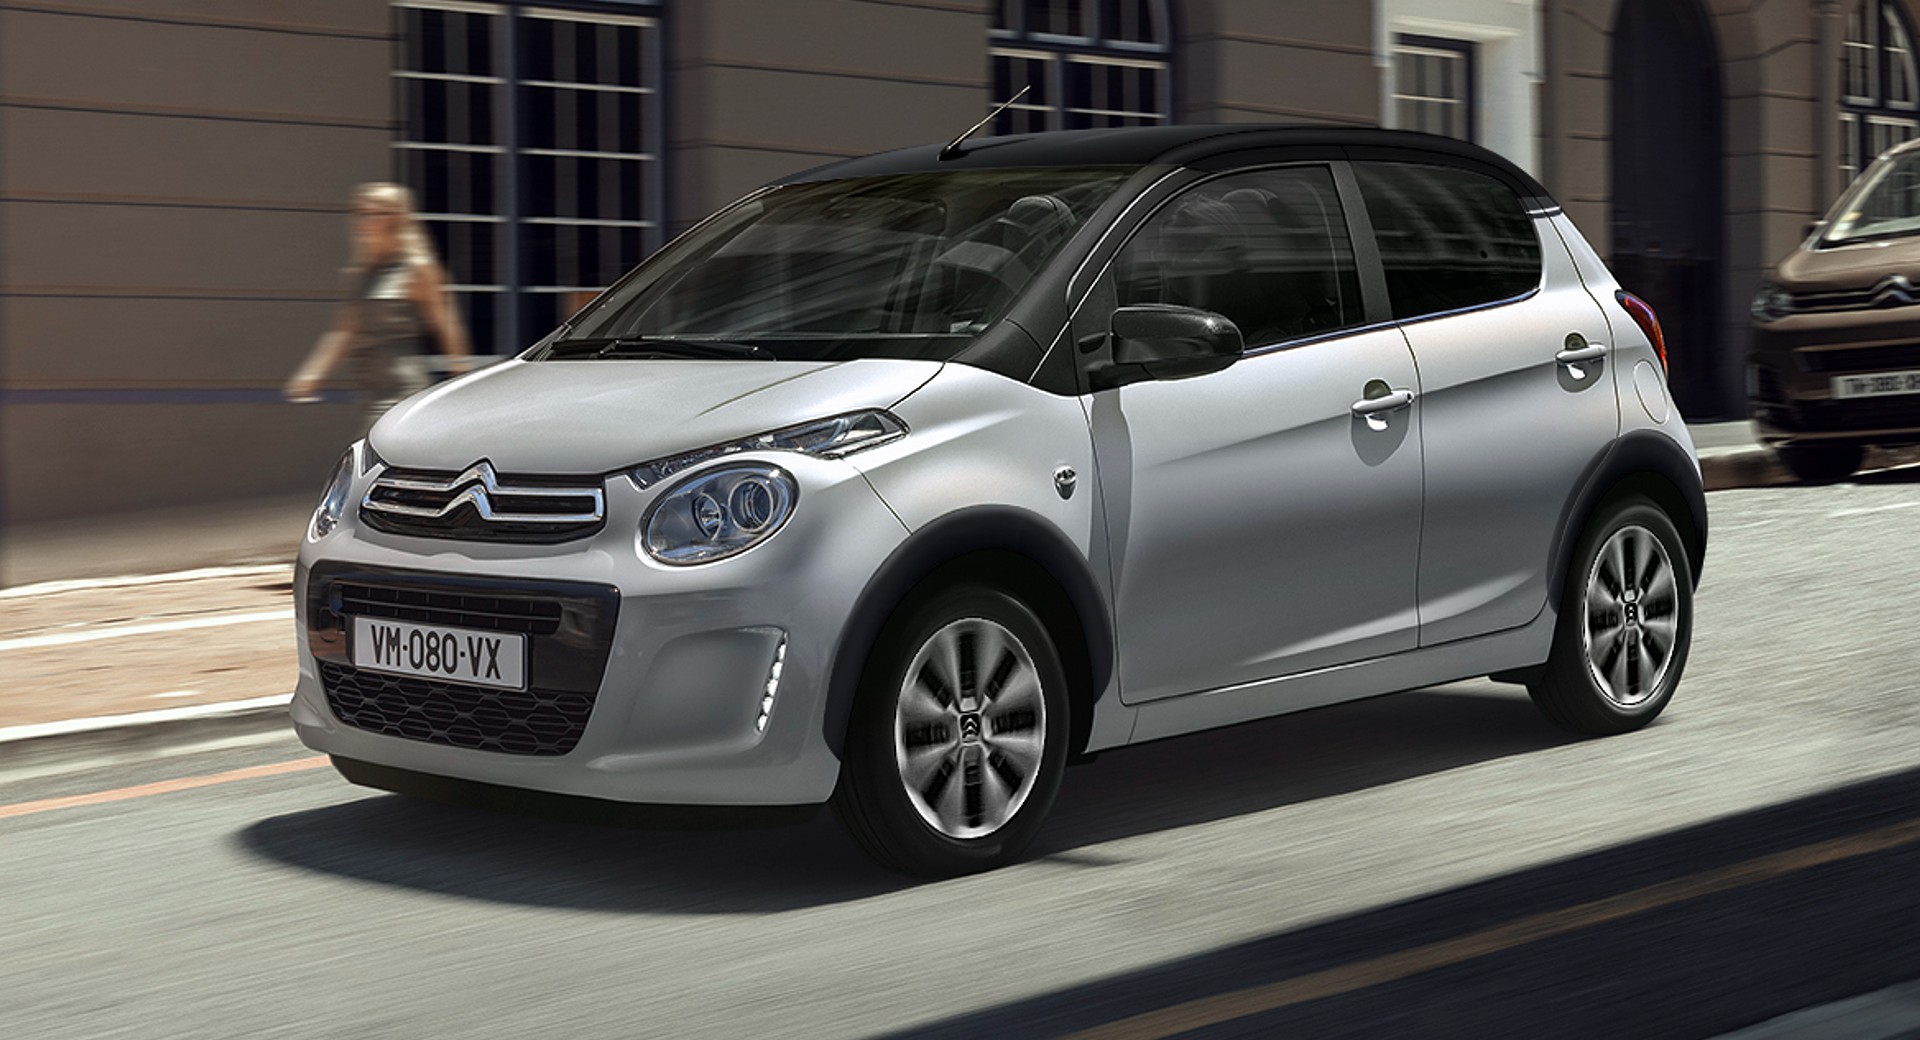 Citroën Ends Production Of The C1, With C3 And Ami EV Models To